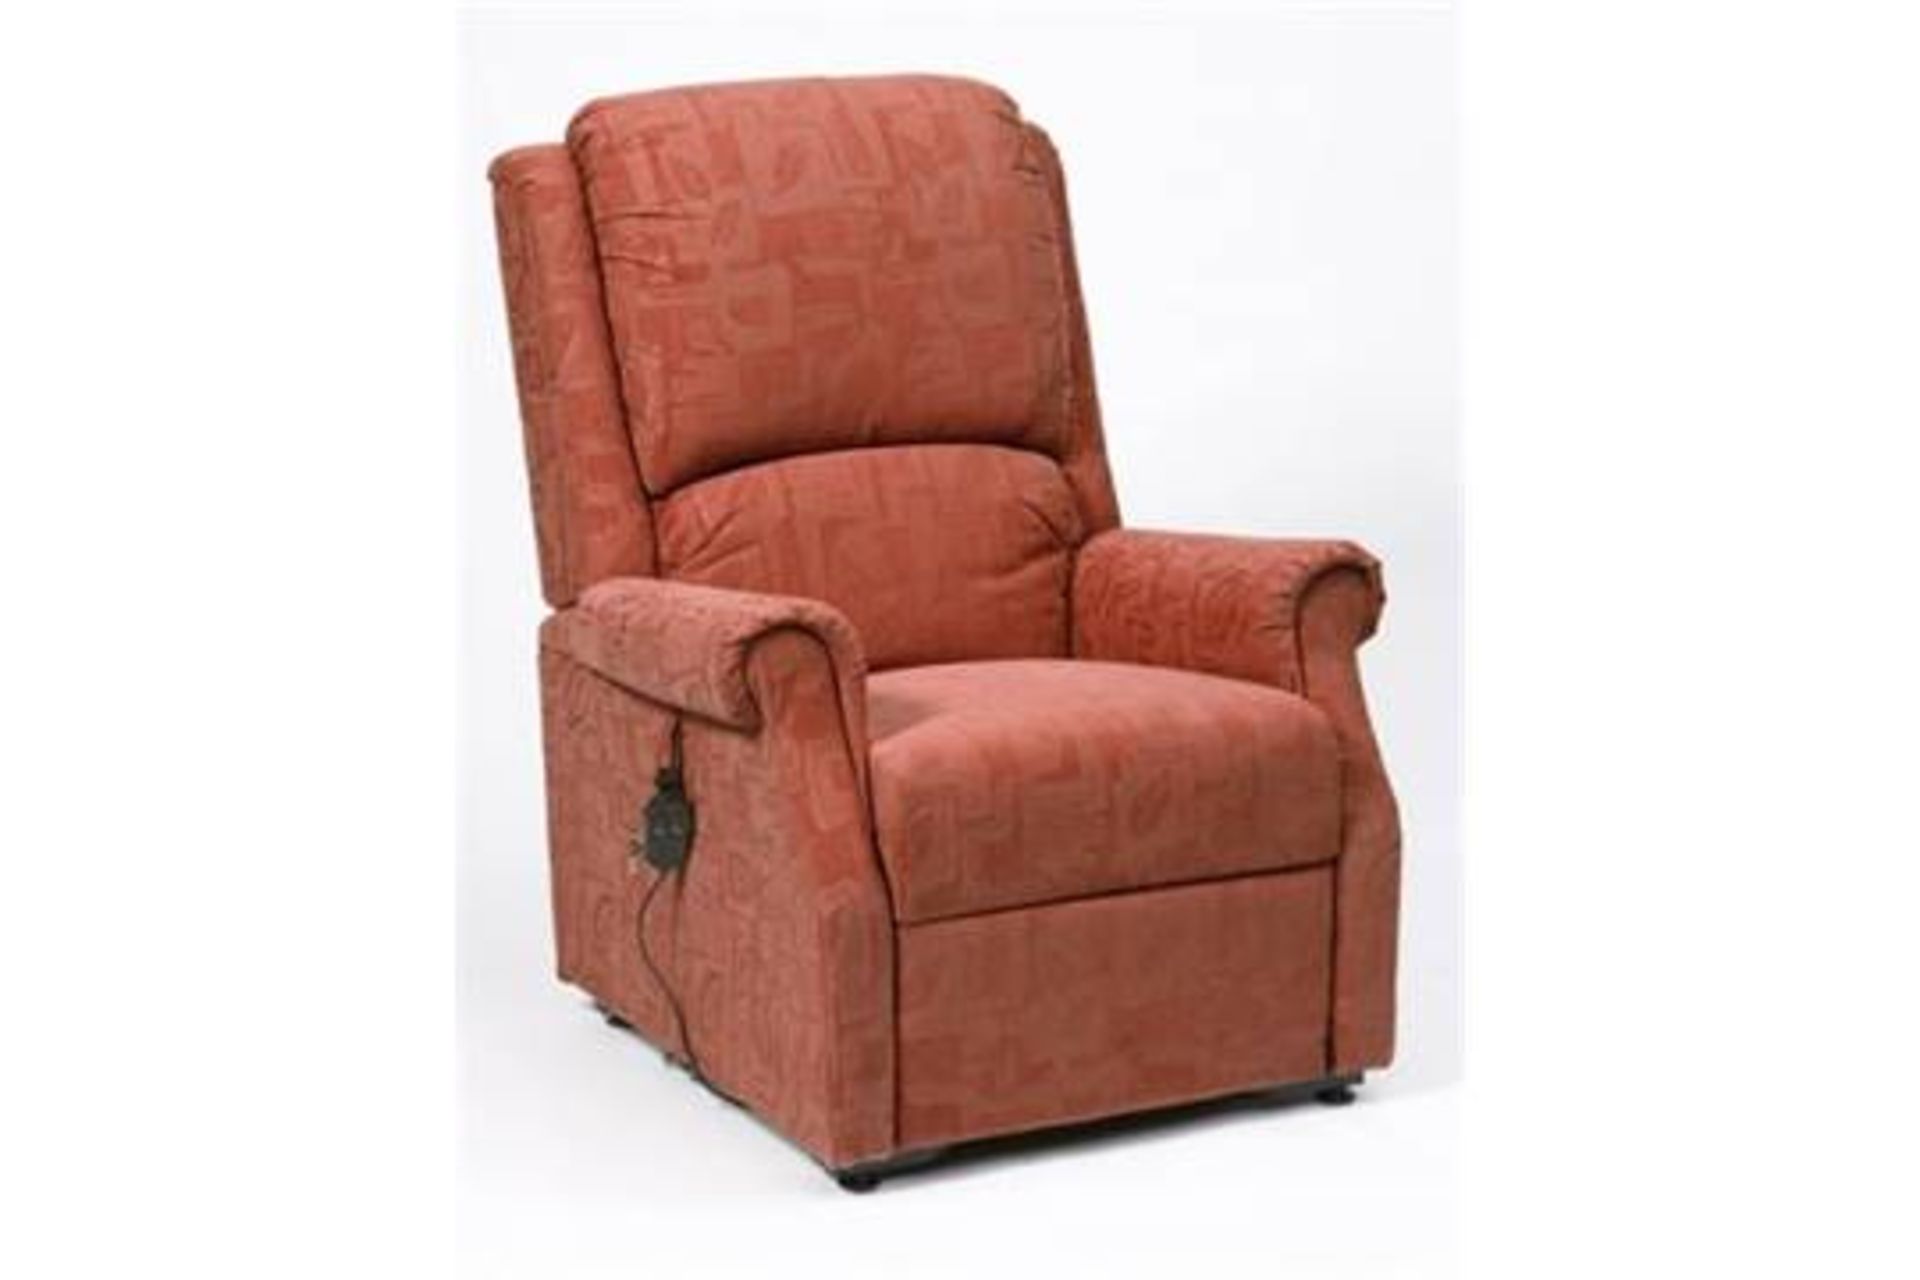 V Grade A Red Velour Rise & Recline Electric Chair With Remote Control Brand New In Box RRP £999